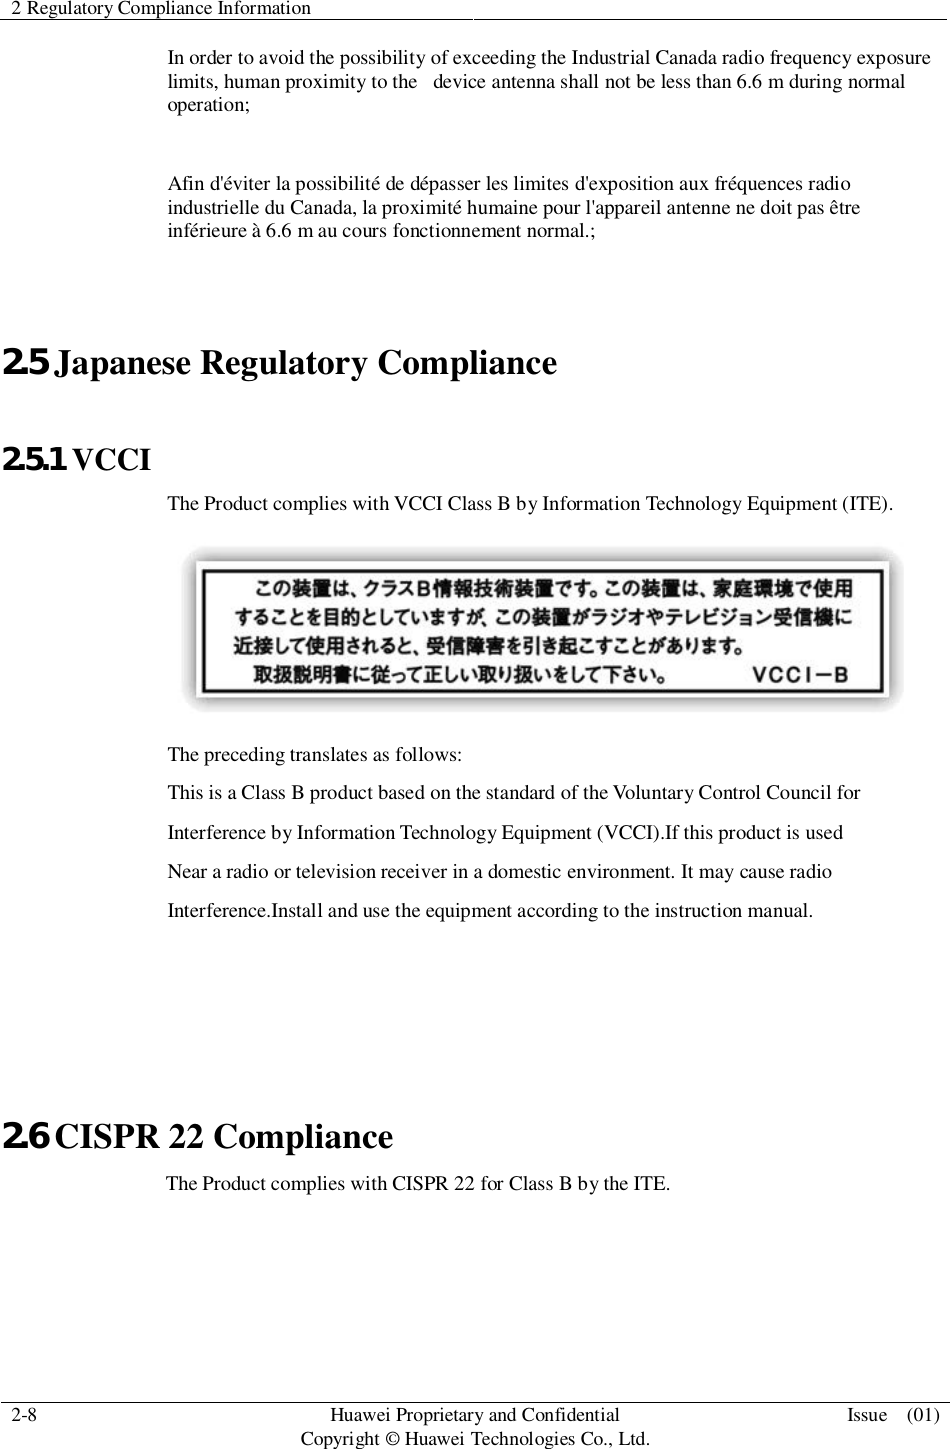 2 Regulatory Compliance Information2-8 HuaweiProprietary and ConfidentialCopyright © Huawei Technologies Co., Ltd. Issue  (01)In order to avoid the possibility of exceeding the Industrial Canada radio frequency exposurelimits, human proximity to the   device antenna shall not be less than 6.6 m during normaloperation;Afin d&apos;éviter la possibilité de dépasser les limites d&apos;exposition aux fréquences radioindustrielle du Canada, la proximité humaine pour l&apos;appareil antenne ne doit pas êtreinférieure à 6.6 m au cours fonctionnement normal.;2.5 Japanese Regulatory Compliance2.5.1 VCCIThe Product complies with VCCI Class B by Information Technology Equipment (ITE).The preceding translates as follows:This is a Class B product based on the standard of the Voluntary Control Council forInterference by Information Technology Equipment (VCCI).If this product is usedNear a radio or television receiver in a domestic environment. It may cause radioInterference.Install and use the equipment according to the instruction manual.2.6 CISPR 22 Compliance                 The Product complies with CISPR 22 for Class B by the ITE.